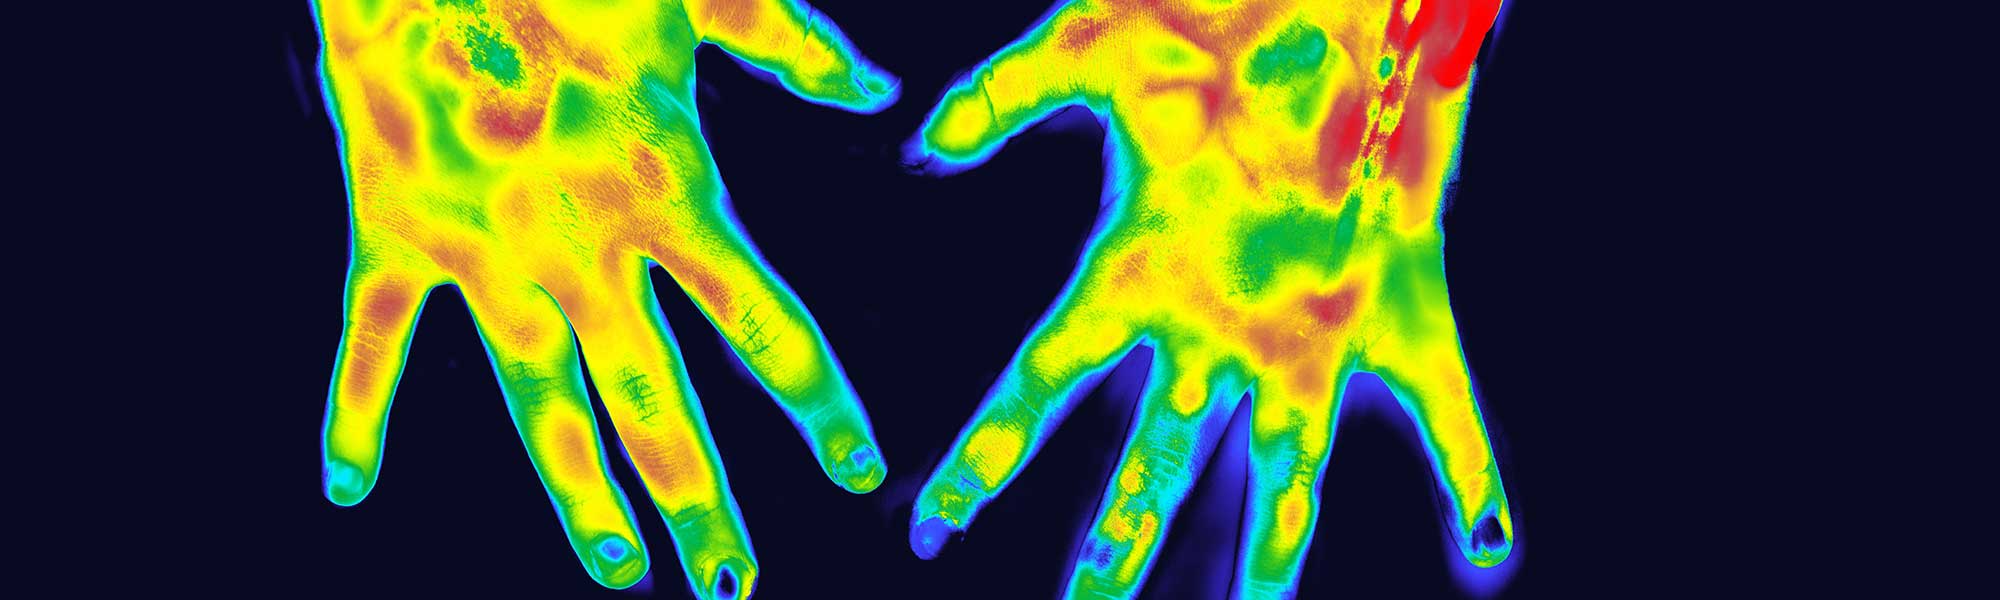 thermal image of hands